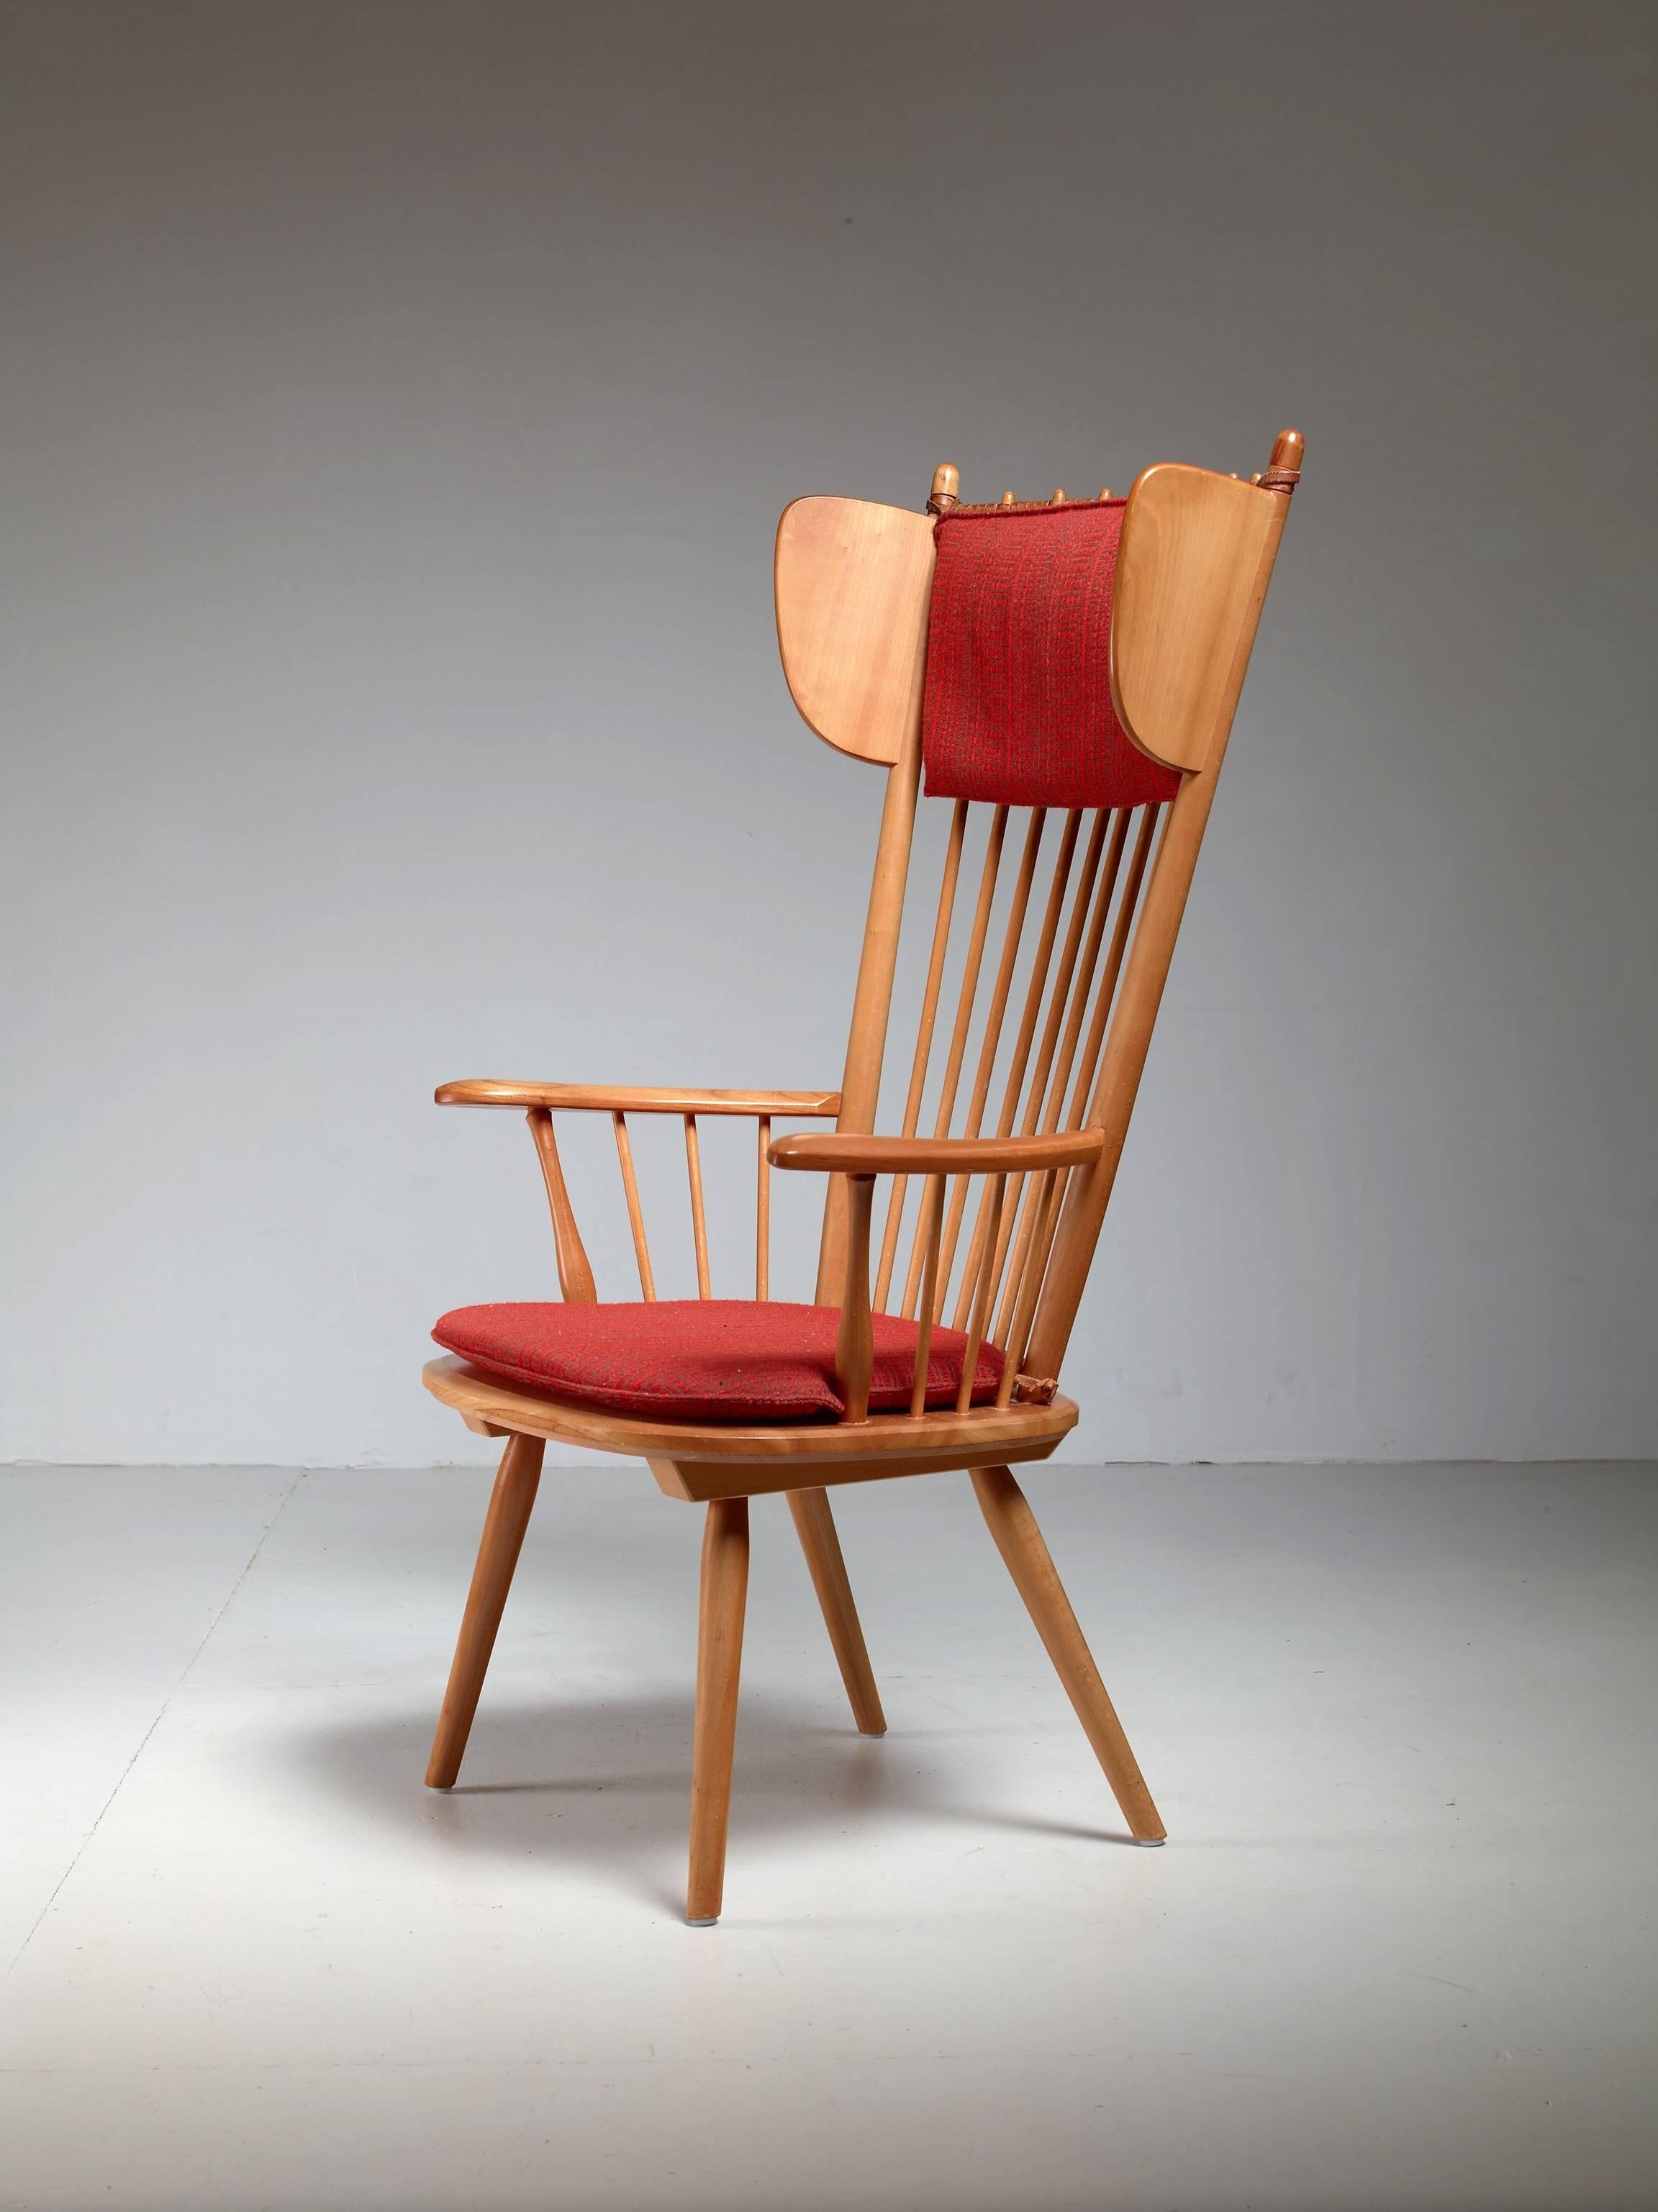 A rare high wingback edition of the architectural arts and crafts chair by Albert Haberer for Hermann Fleiner, Stuttgart, circa 1949.
The flexible backrest is made of thin spindles, held together with a leather connection. The leather is a beautiful